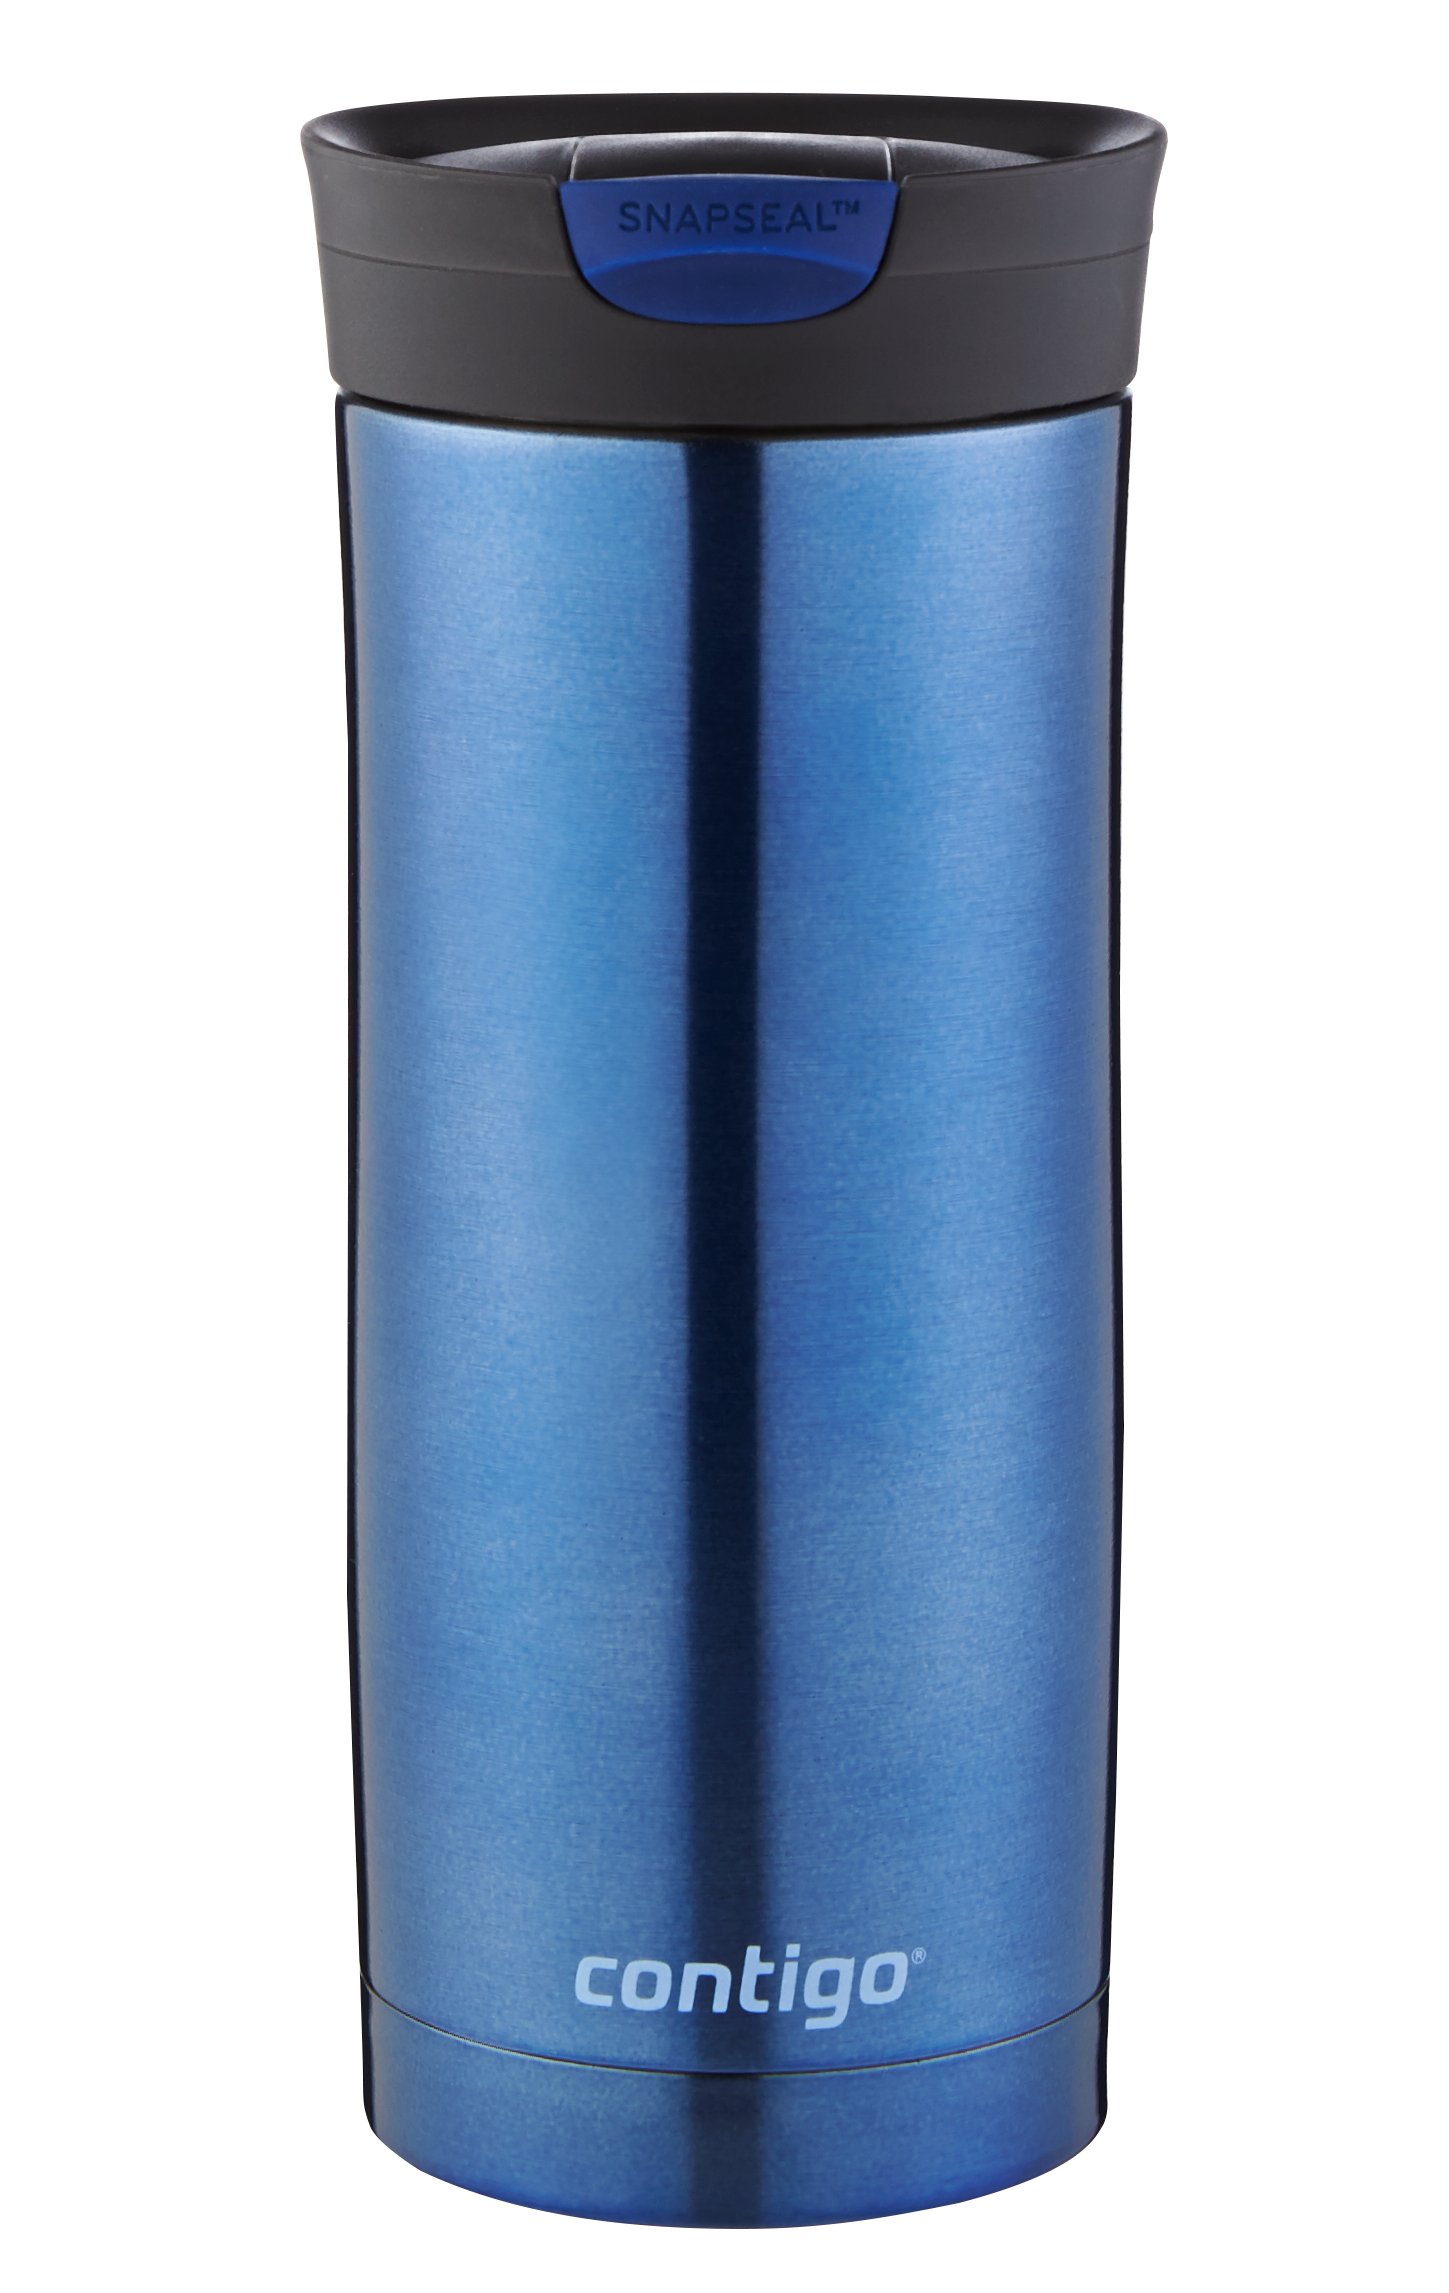 Weighted Insulated Large Mug :: heavy single handle mug with no-spill lid